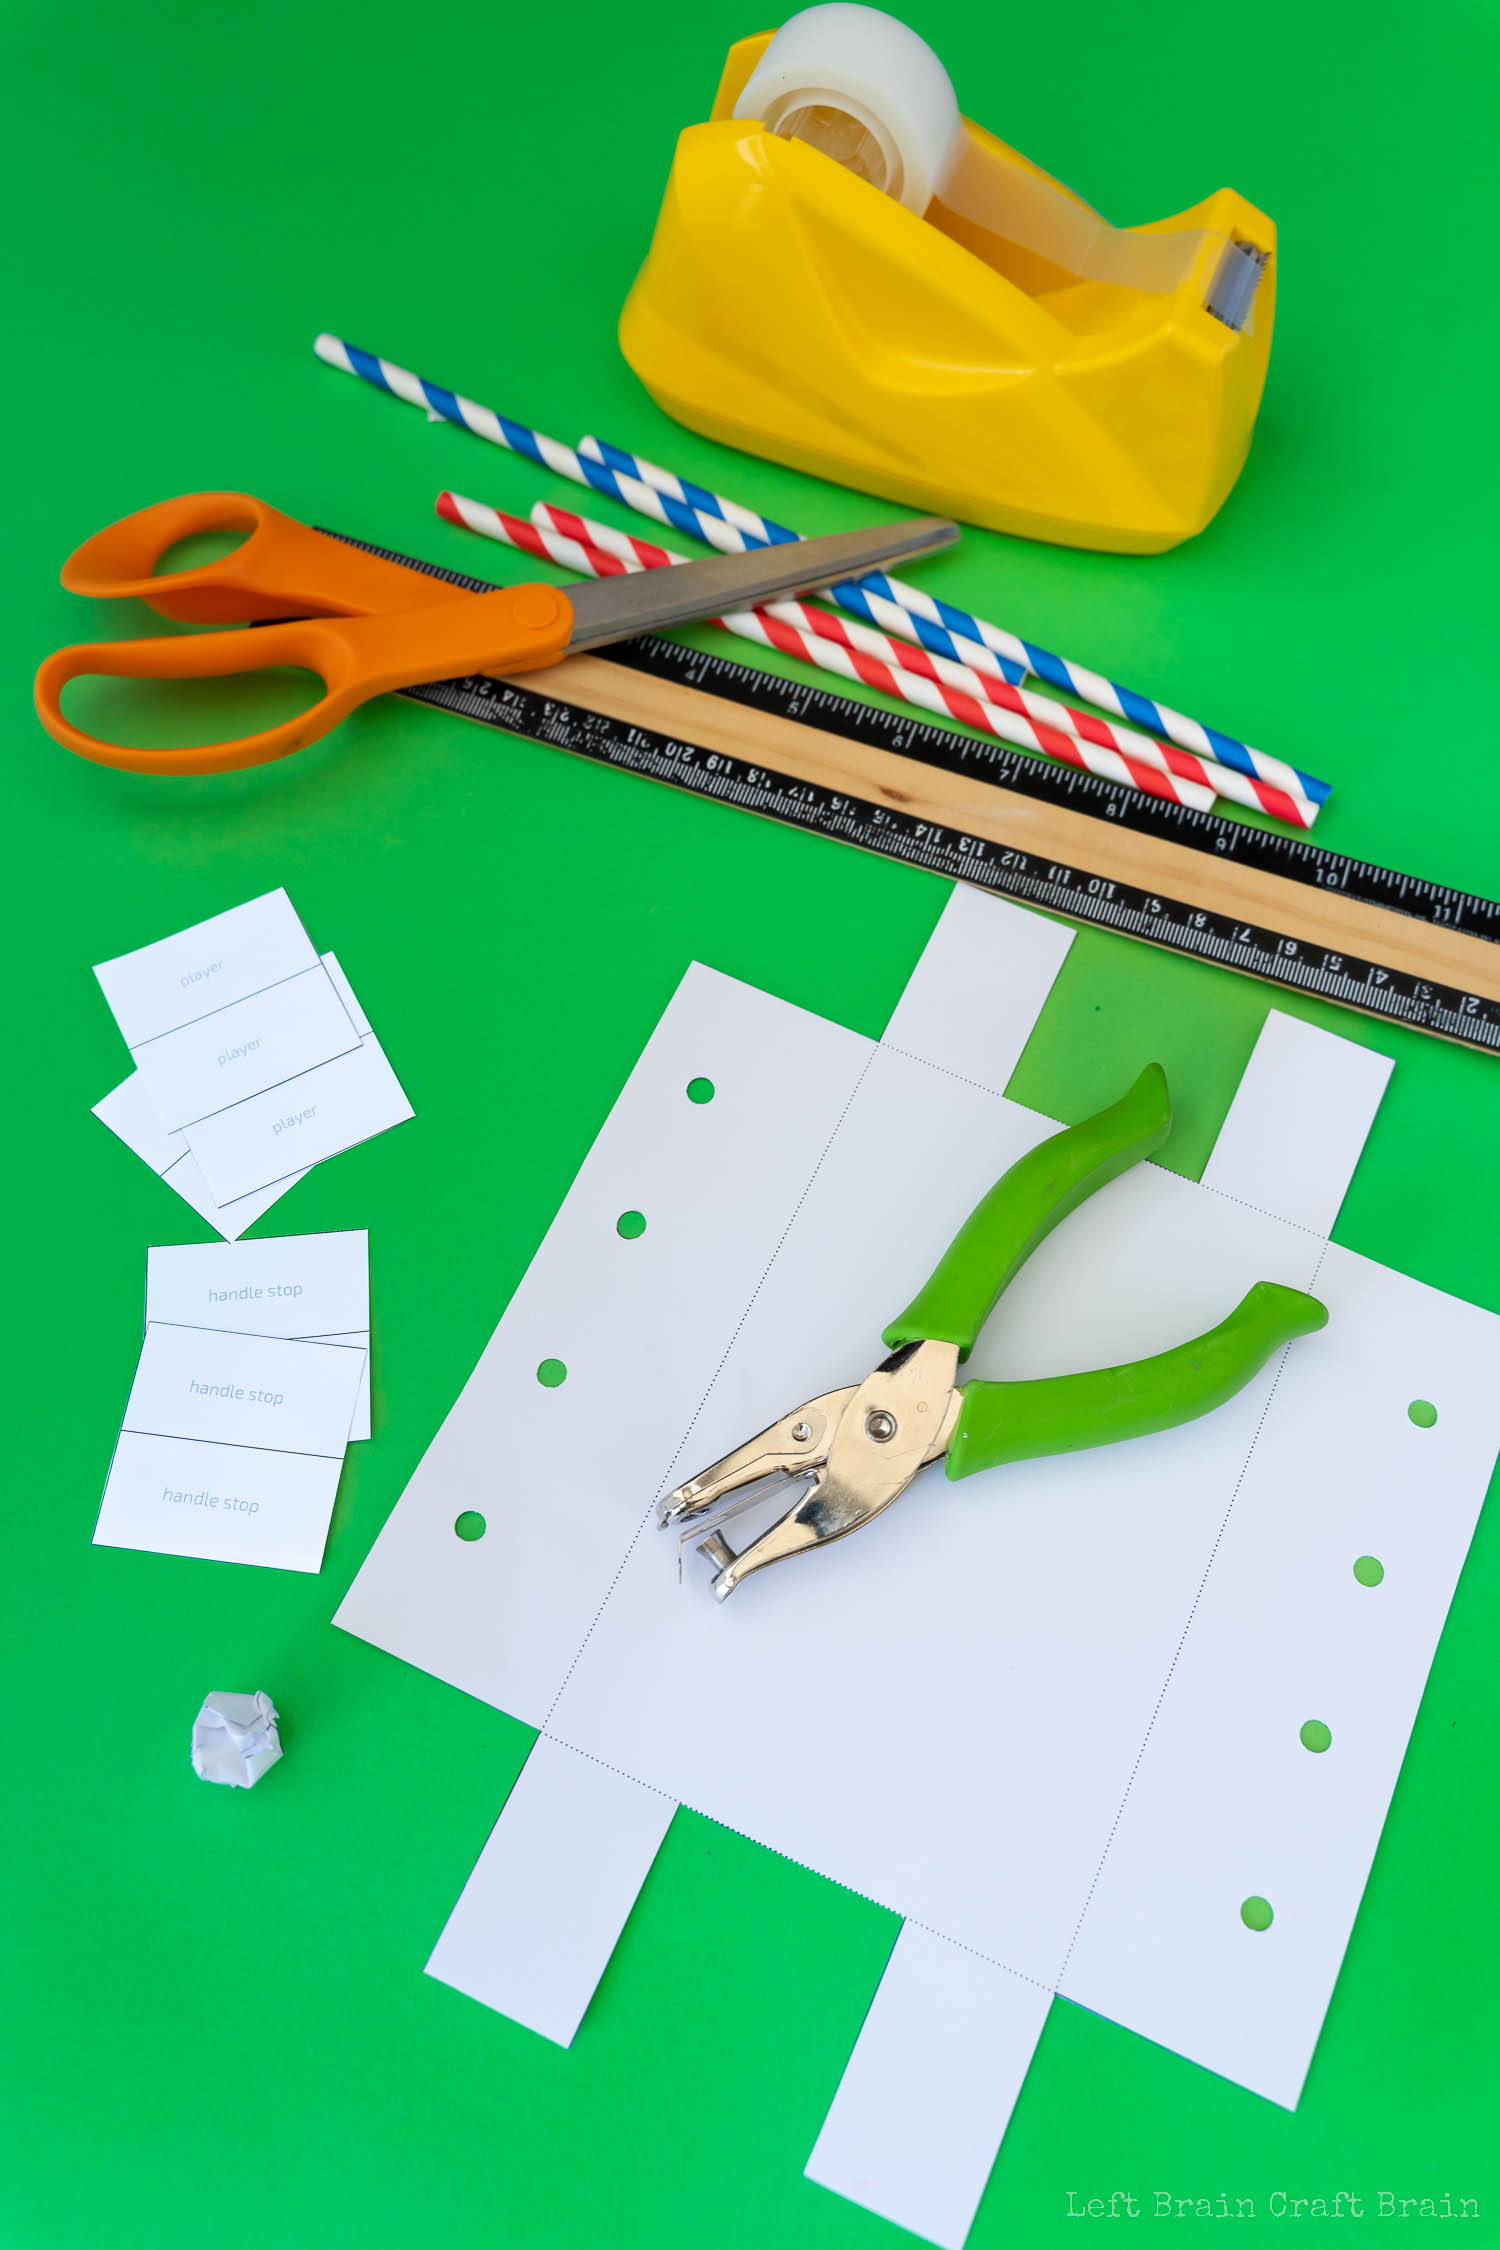 cut and punch holes in paper foosball template (green hole punch, red and blue striped paper straws, orange-handled scissors, yellow tape dispenser, black and wood ruler, white paper template, crumpled paper ball, small pieces of paper that say handle stop and player on green paper background)